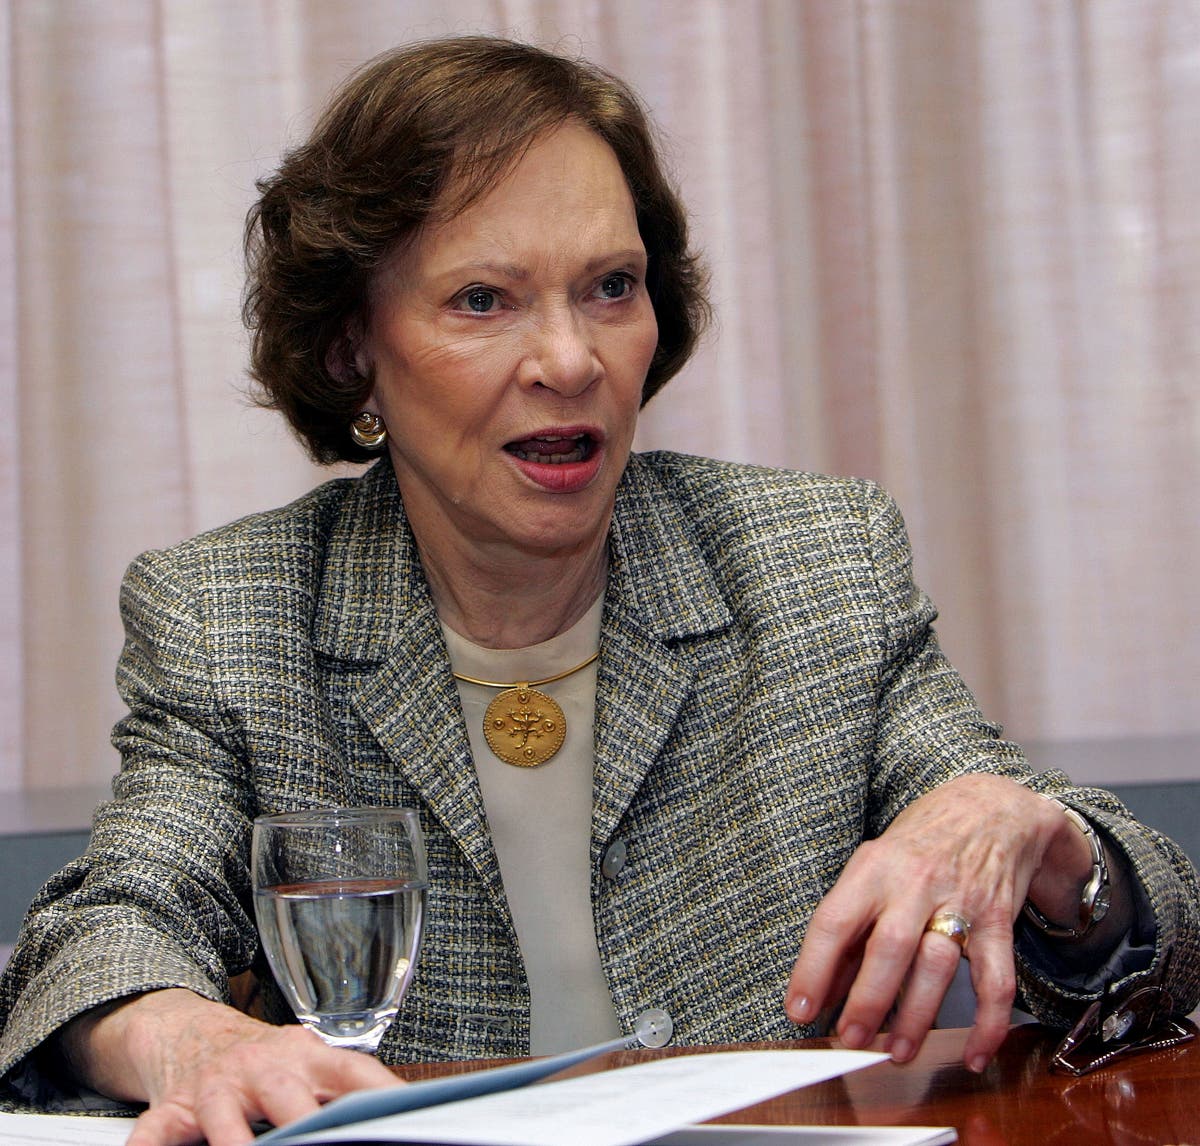 Rosalynn Carter’s advocacy for mental health was rooted in compassion and perseverance